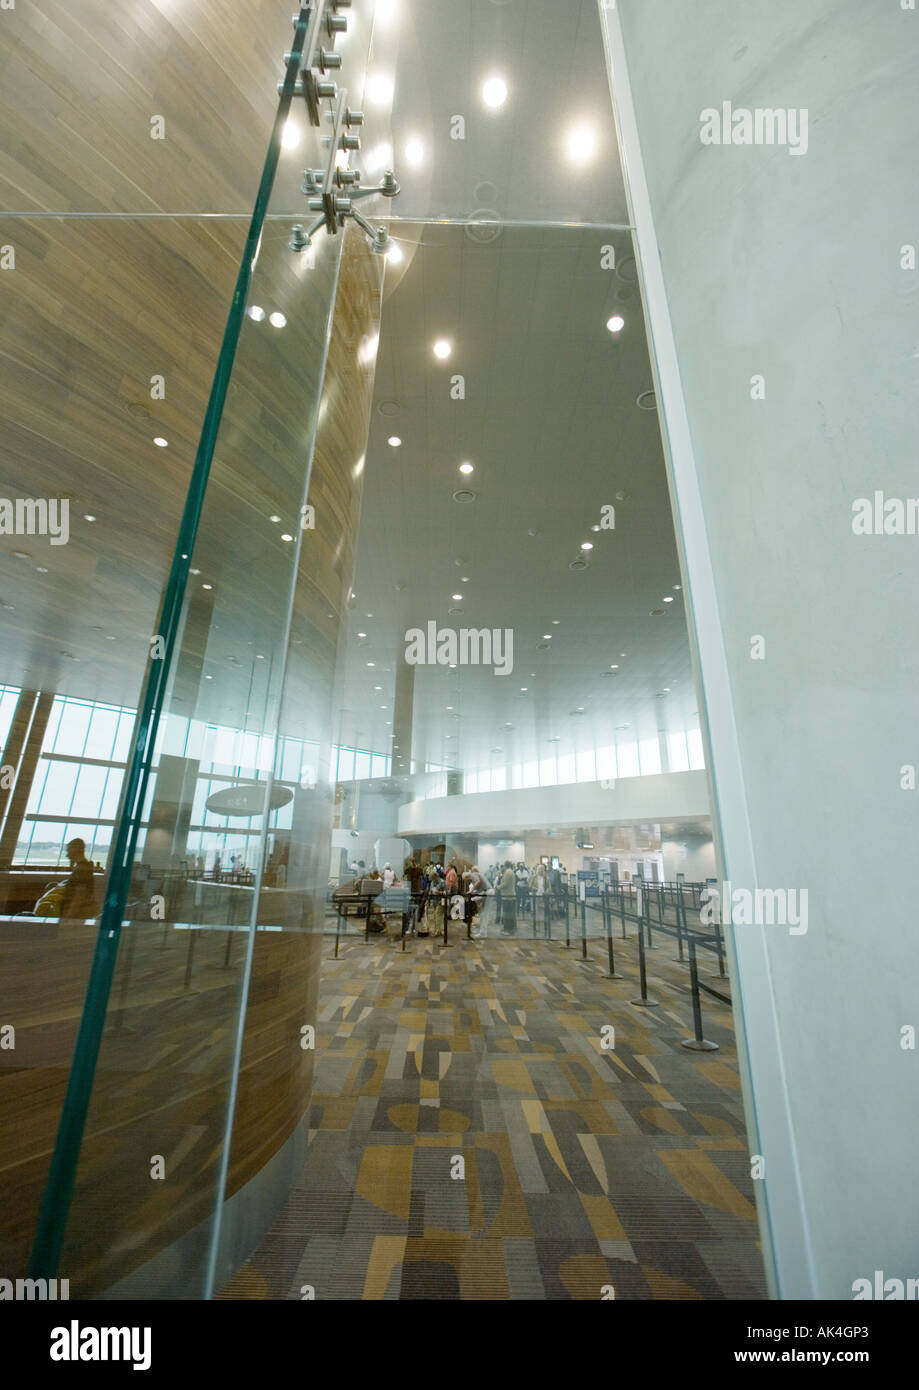 Airport interior, architectural view with security line in background Stock Photo